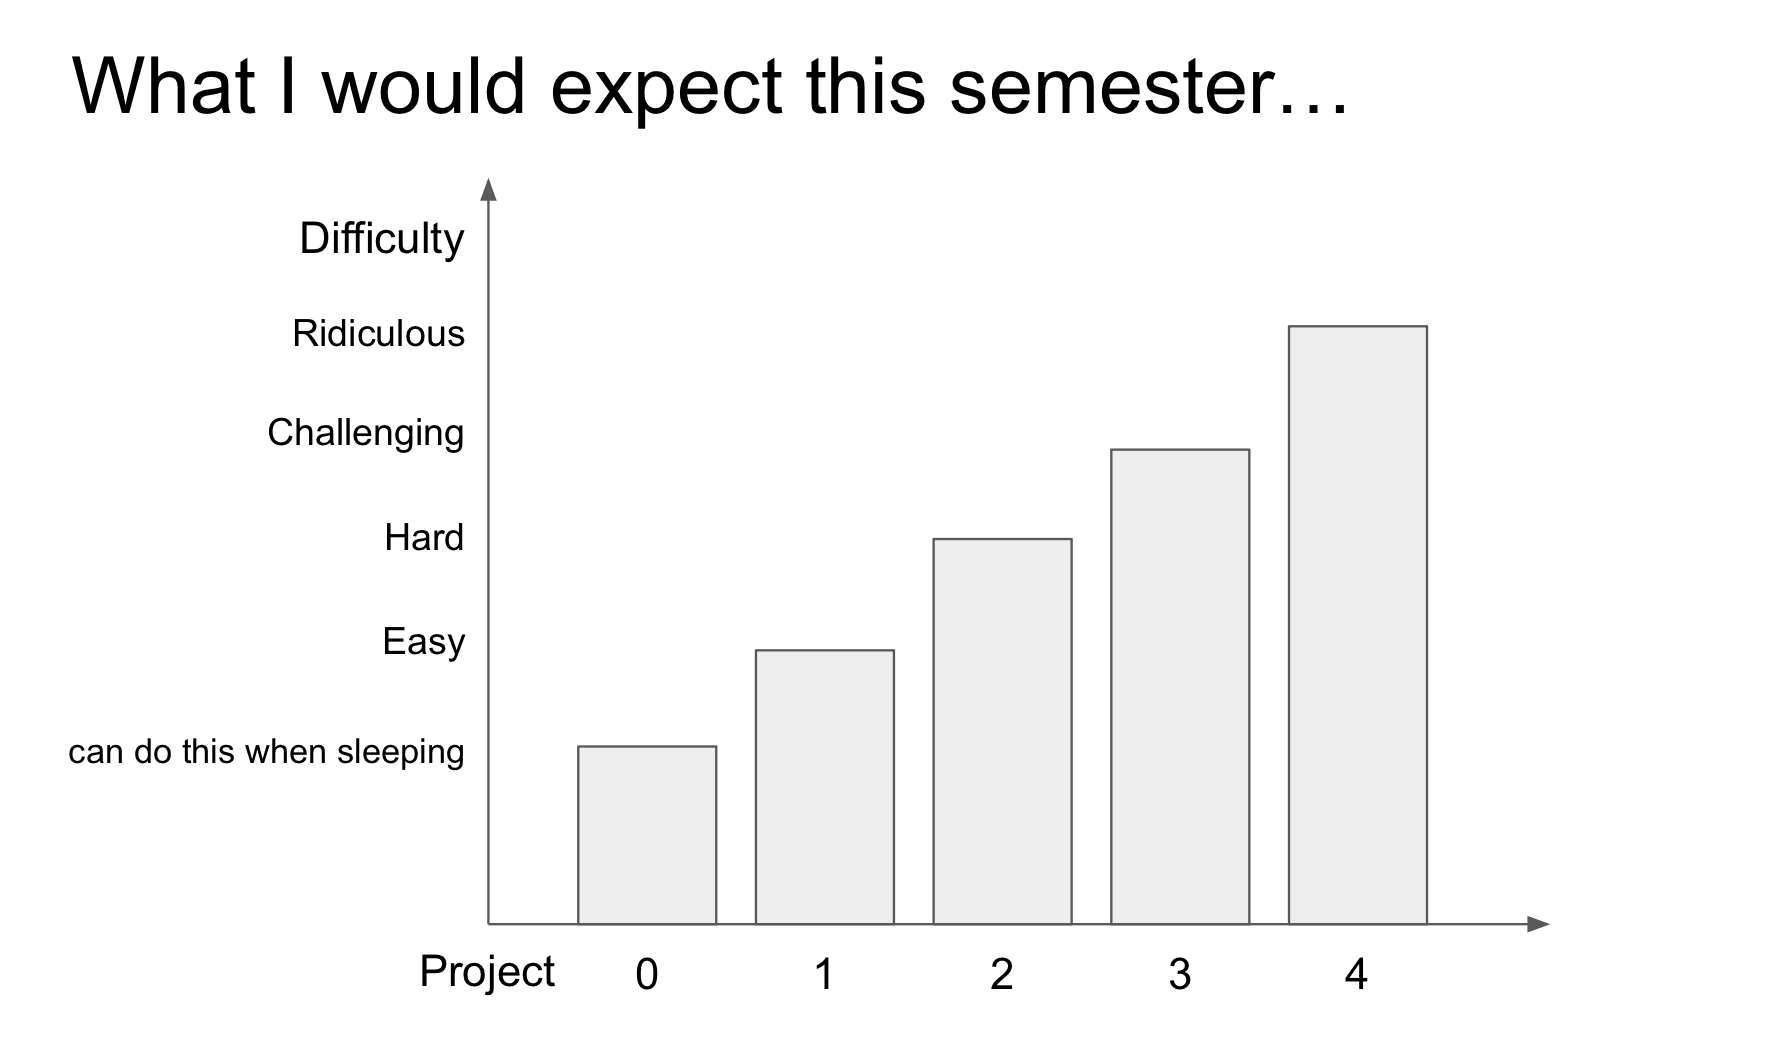 my expectation for difficulties of the course projects